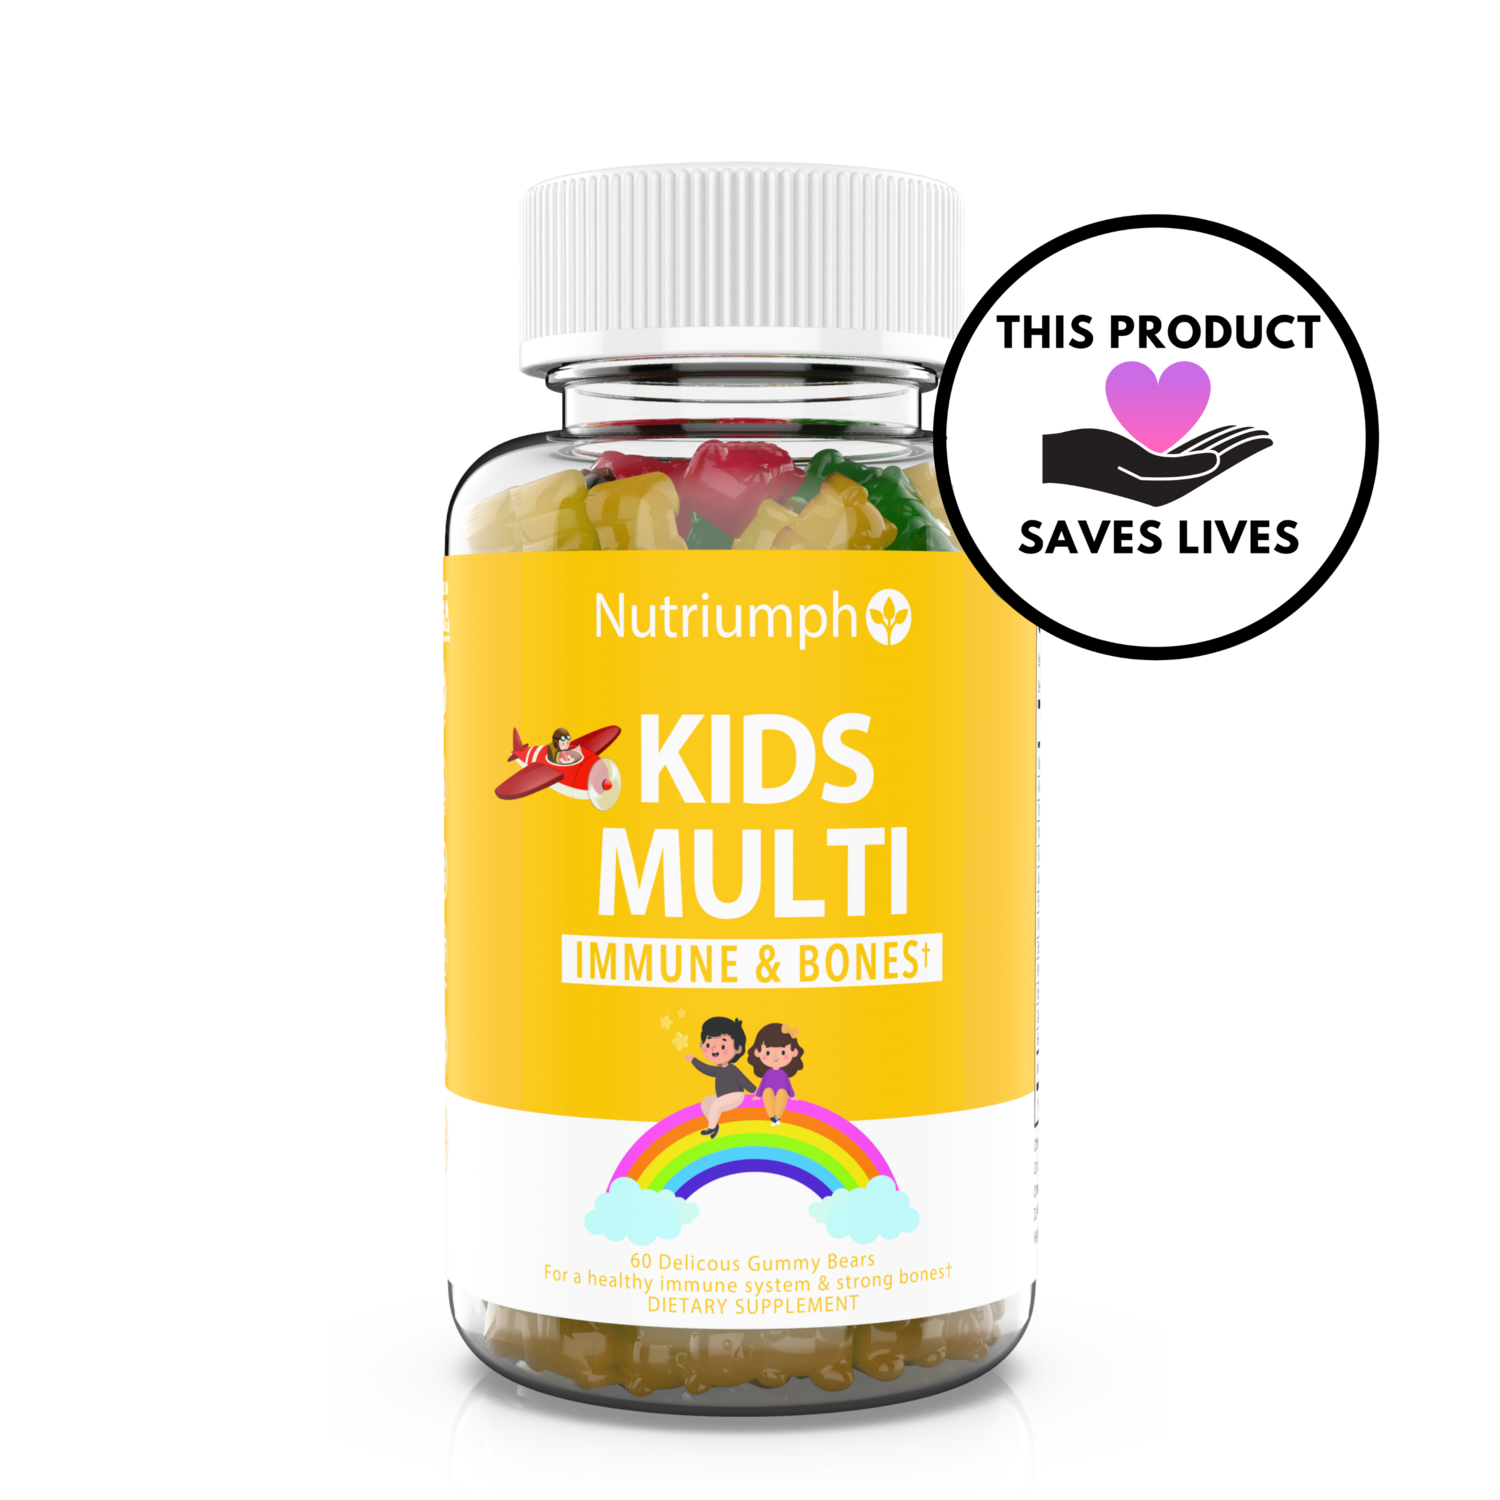 KIDS MULTIVITAMIN - Vitamin A, C, D3, E and Zinc Supplements for Immunity, Strong Bones & Energy